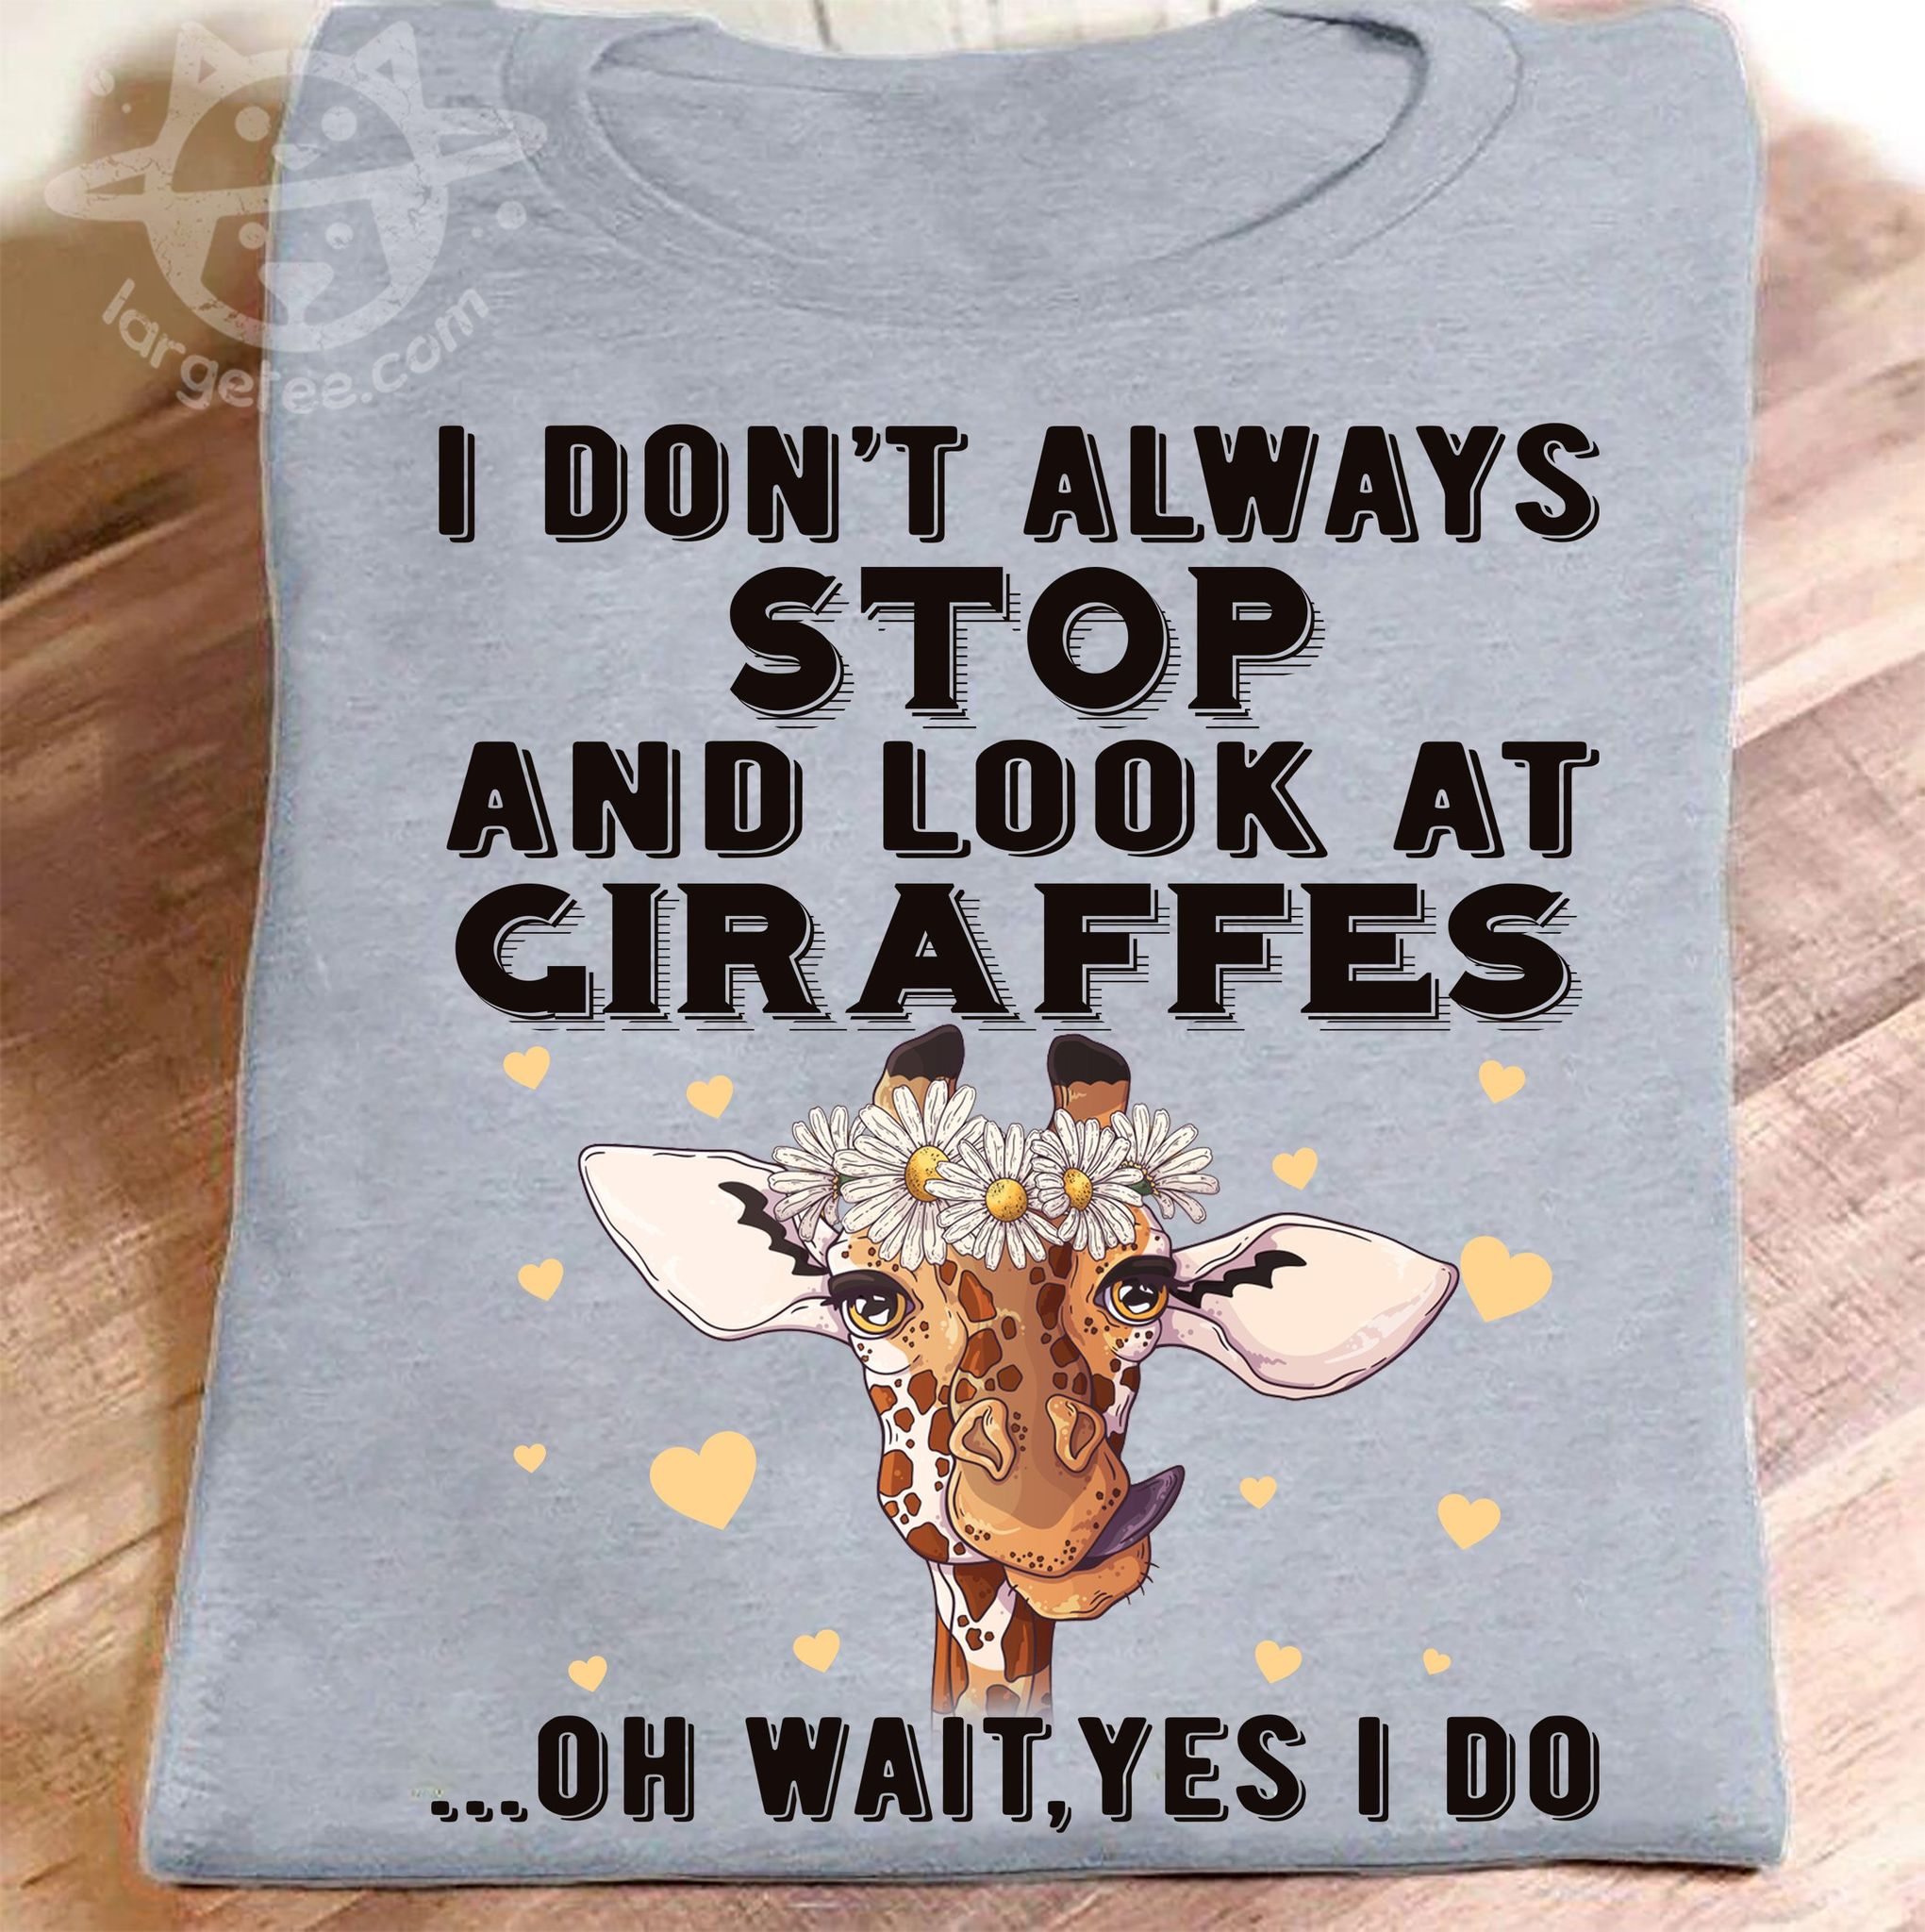 I don't always stop and look at giraffes